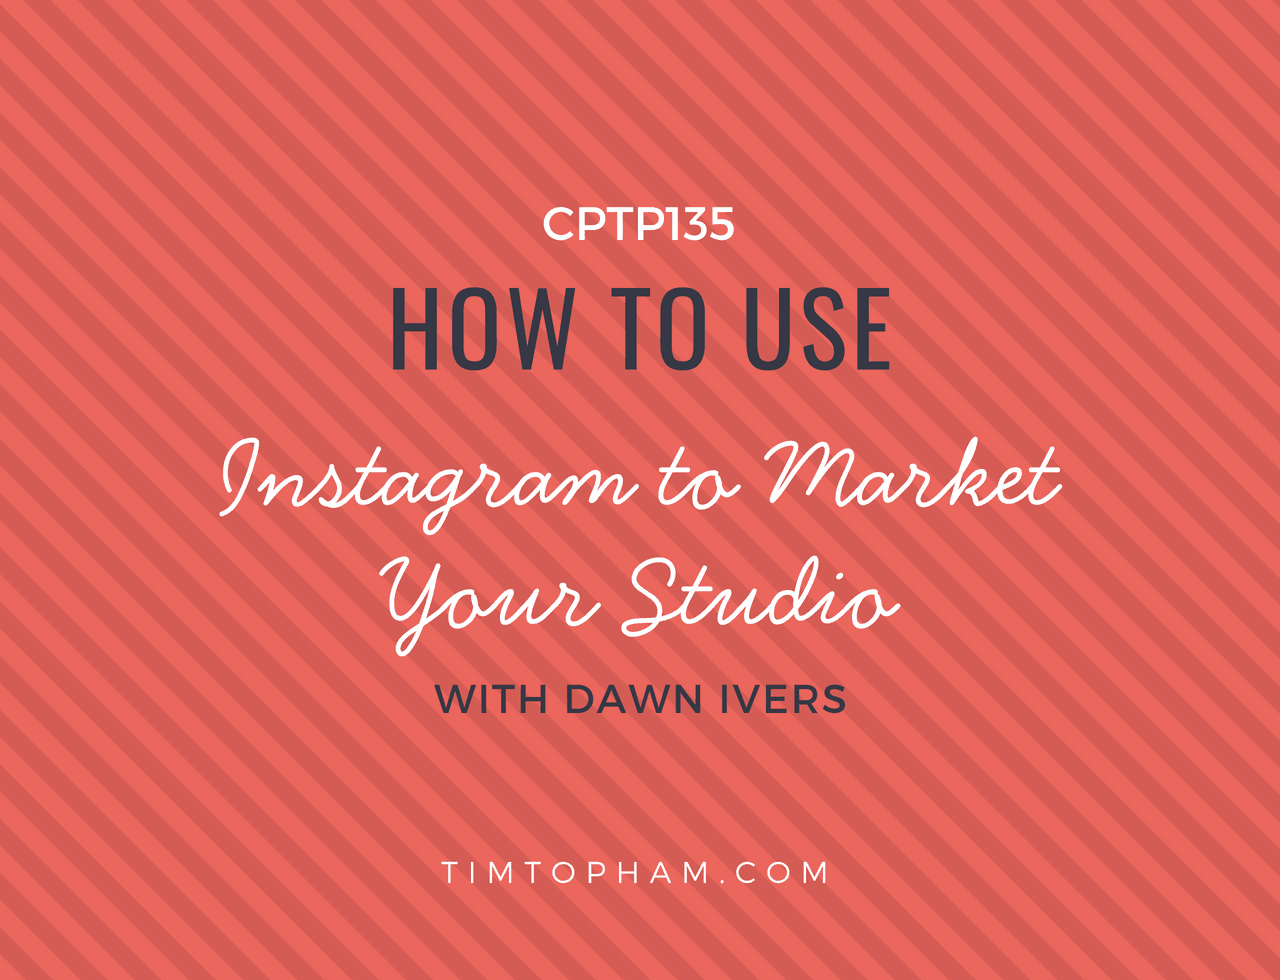 CPTP135_-How-to-use-Instagram-to-Market-Your-Studio-with-Dawn-Ivers